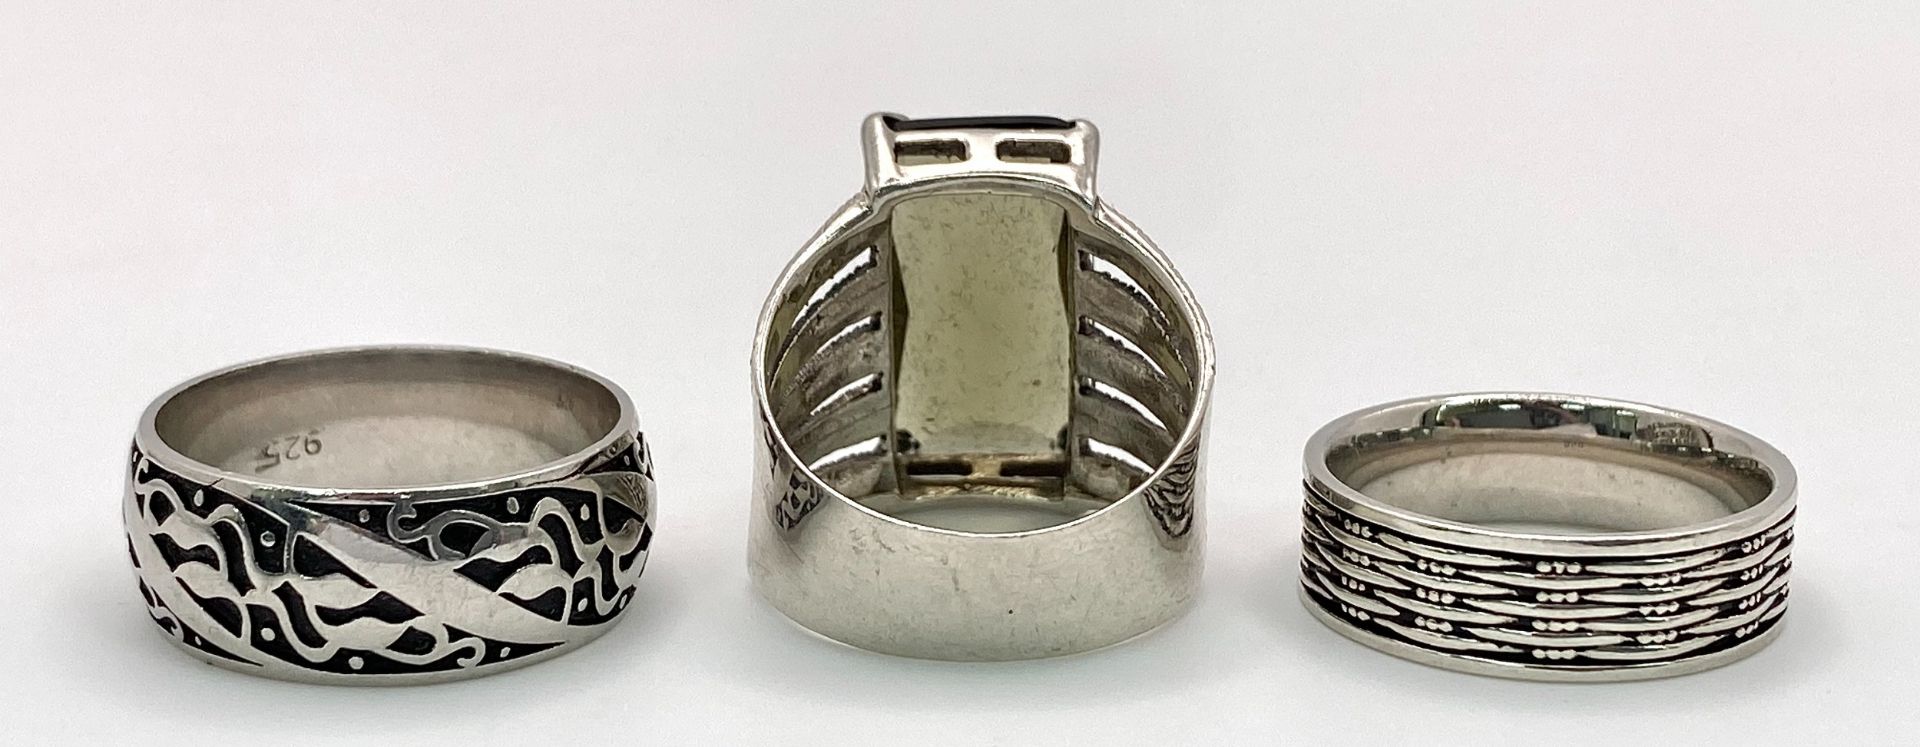 Three Different Style 925 Silver Rings. Sizes: 2 x R, 1 x U. - Image 2 of 6